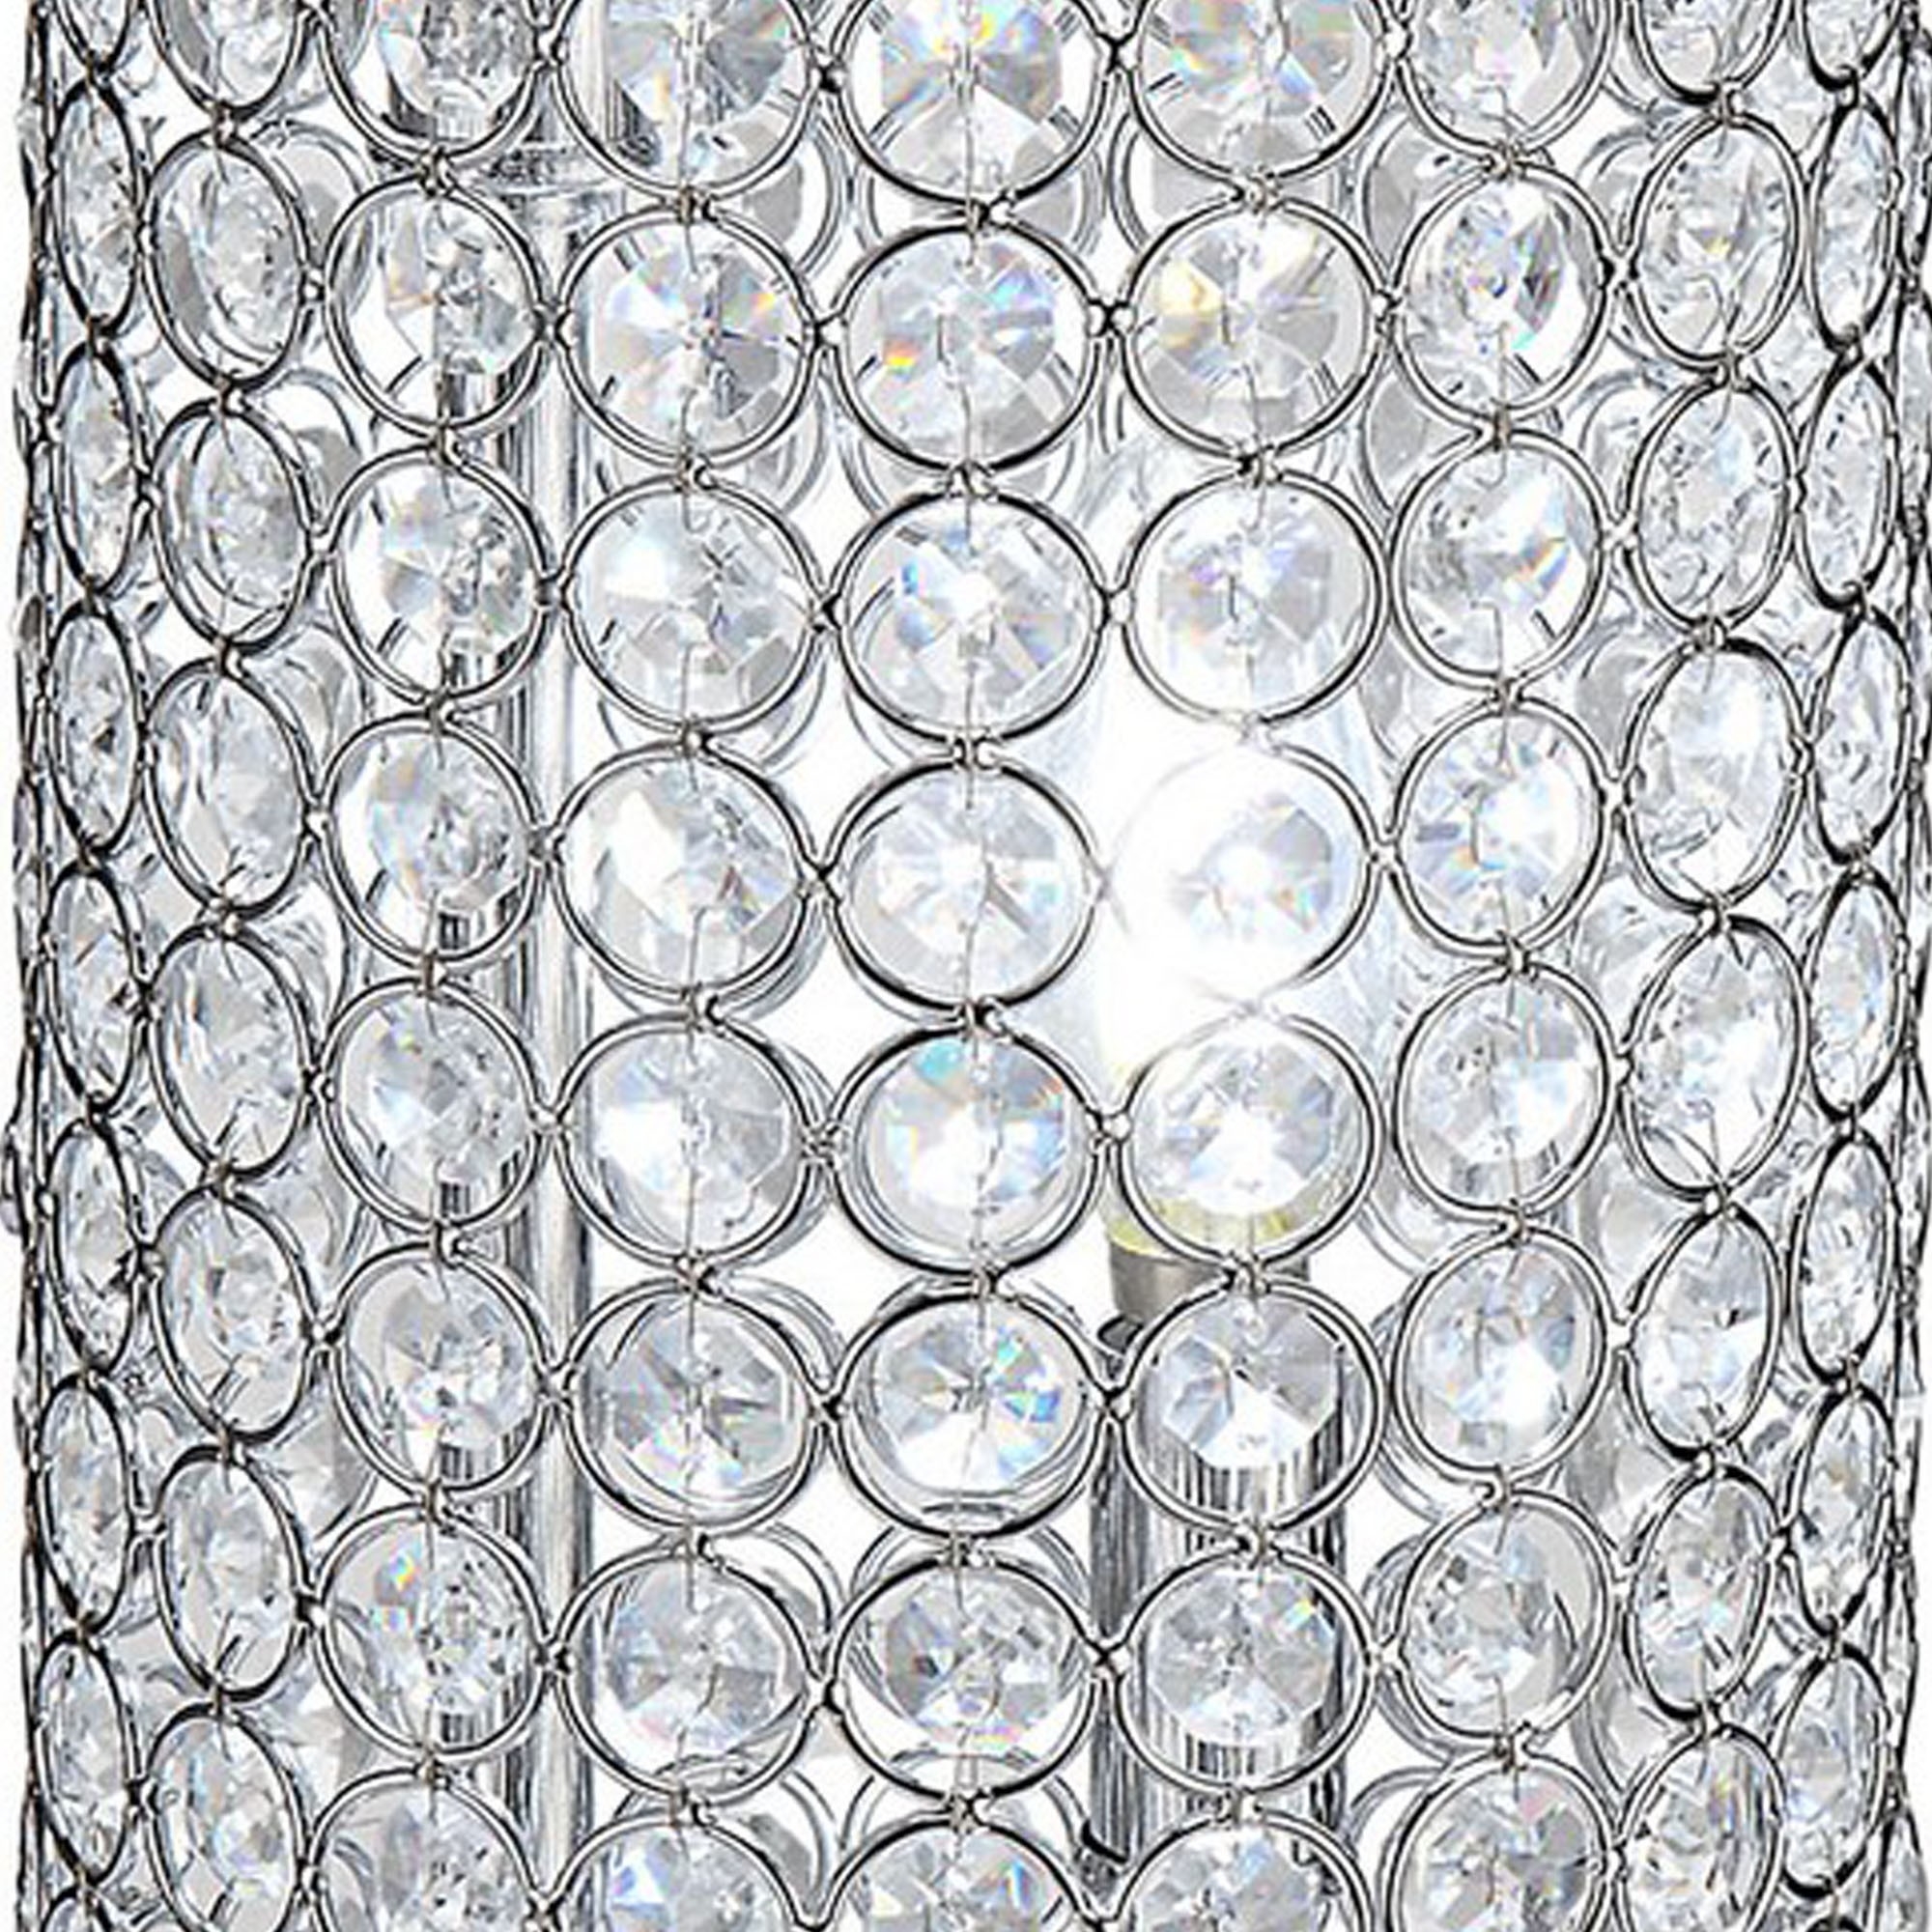 21 Inch Table Lamp, Crystal Stand, Open-Top Design, Silver Finished Metal -Saltoro Sherpi